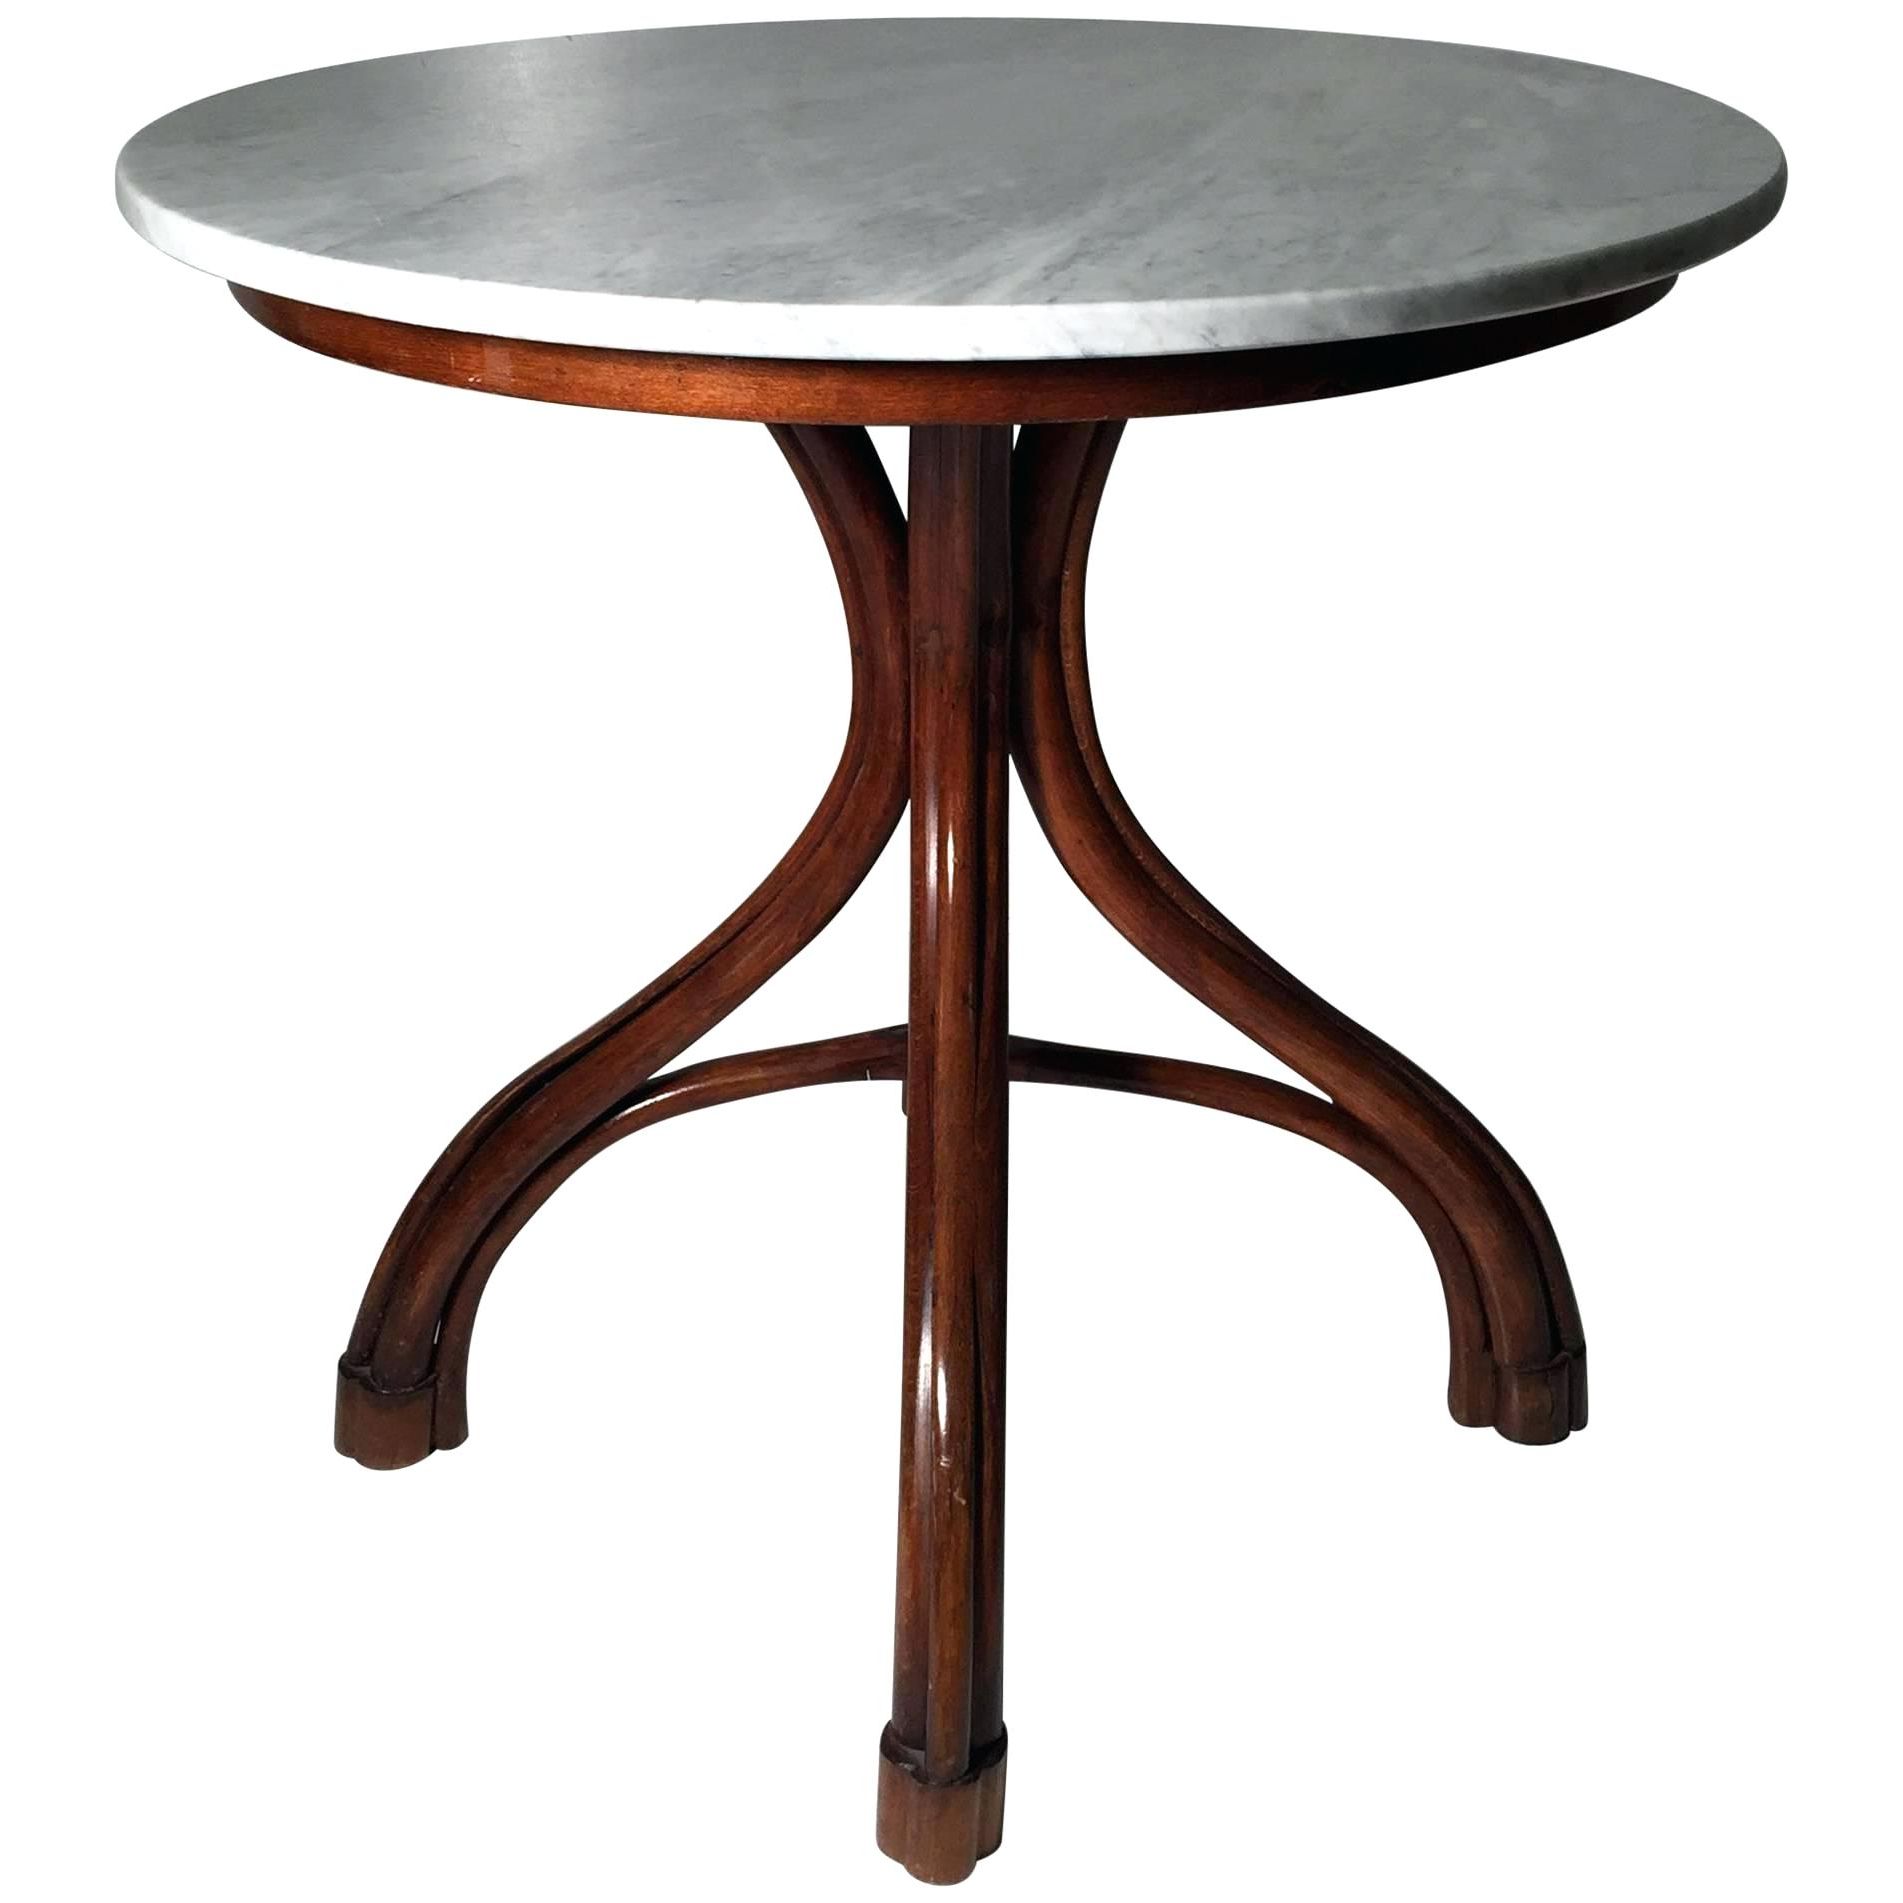 Most Popular Porch &amp; Den Shilshole Tempered Glass Bentwood Accent Tables With Regard To Monarch Bentwood Accent Table With Tempered Glass (View 11 of 20)